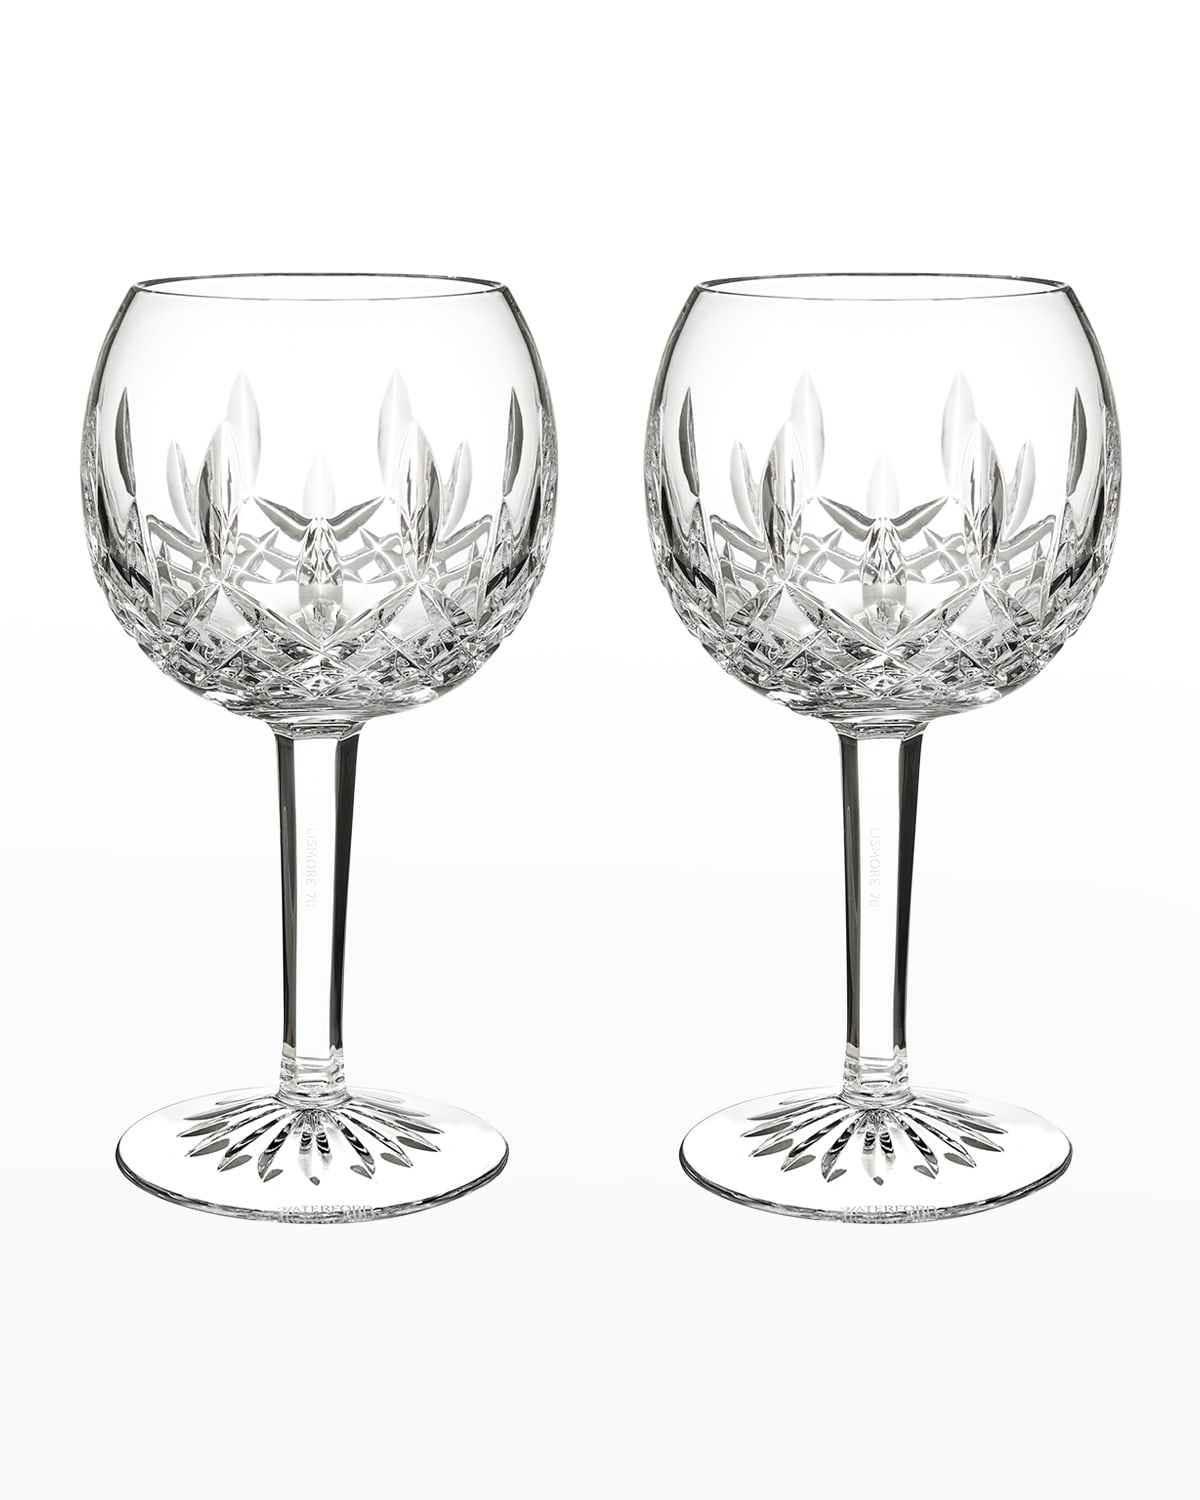 Waterford Crystal Irish Lace White Wine Glasses, Set of 2